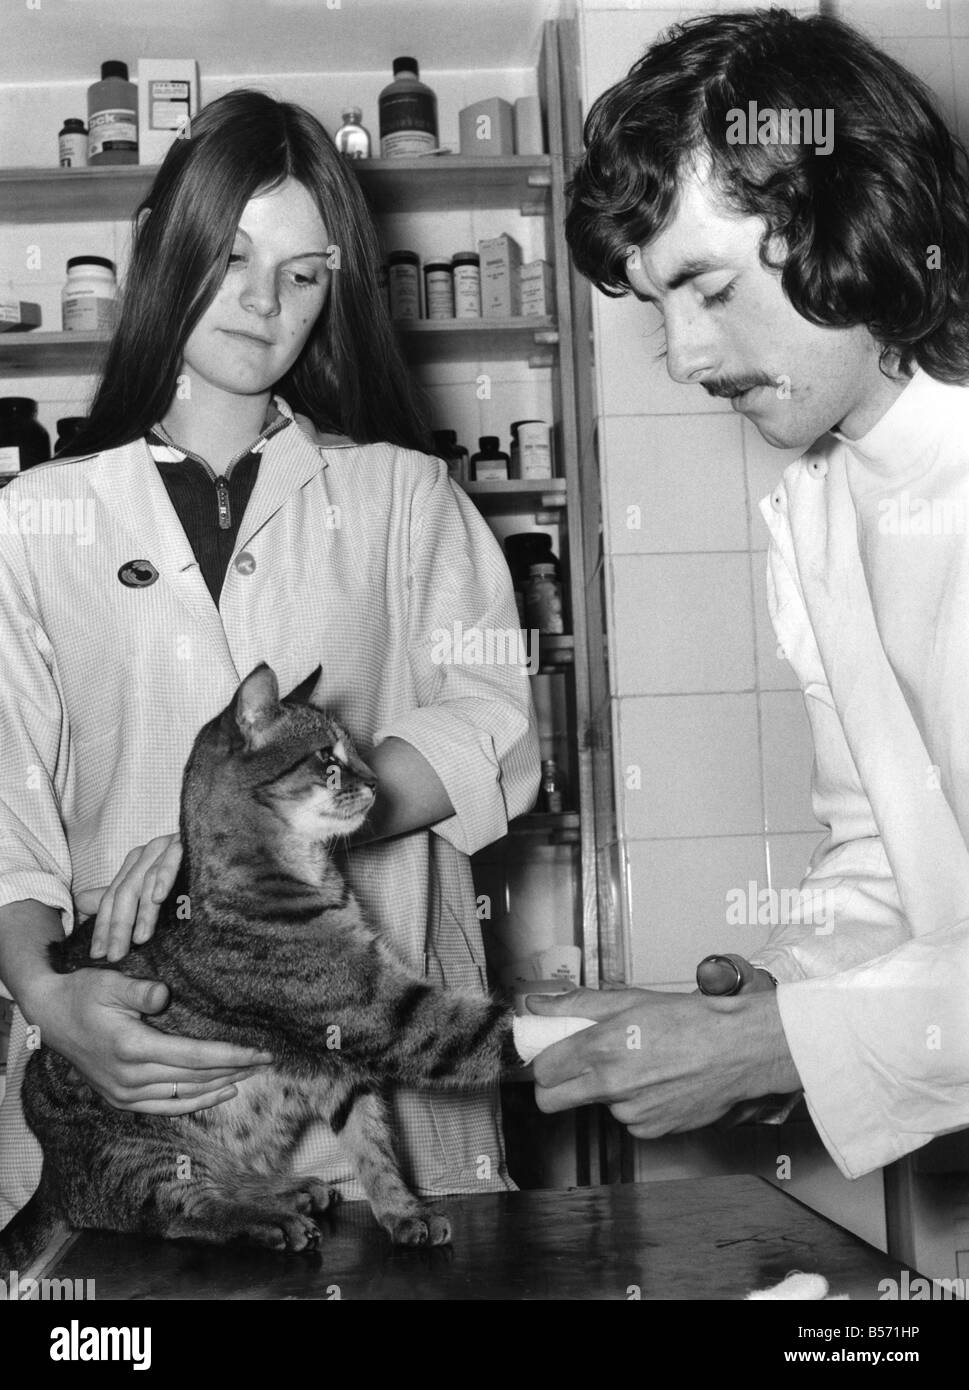 Student veterinary nurse Caroline Smith, 16, who is under training with veterinary surgeon Alan Hitchins at his surgery in Kings Road, Chelsea. ;June 1972 ;P004039 Stock Photo